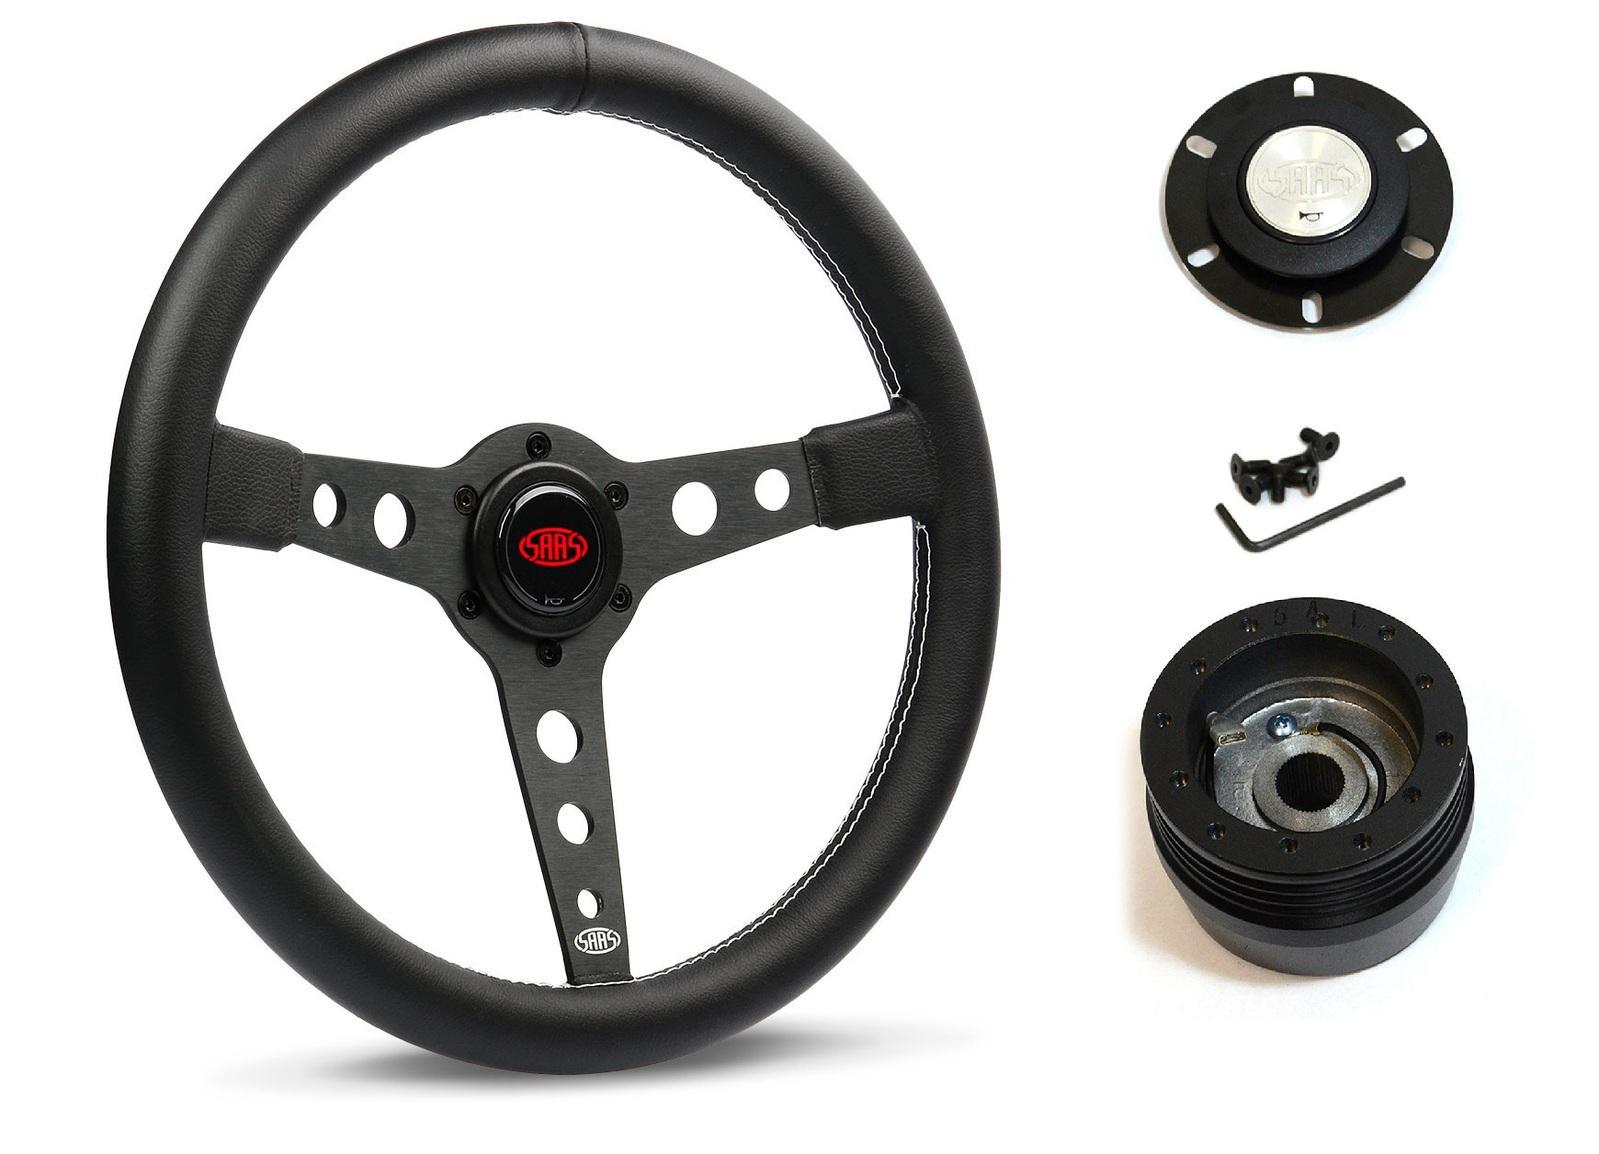 SAAS Steering Wheel Leatherette 14" ADR Retro Black Spoke White Stitching SW616OS-WS and SAAS boss kit for Chevrolet El Camino 1968-1988